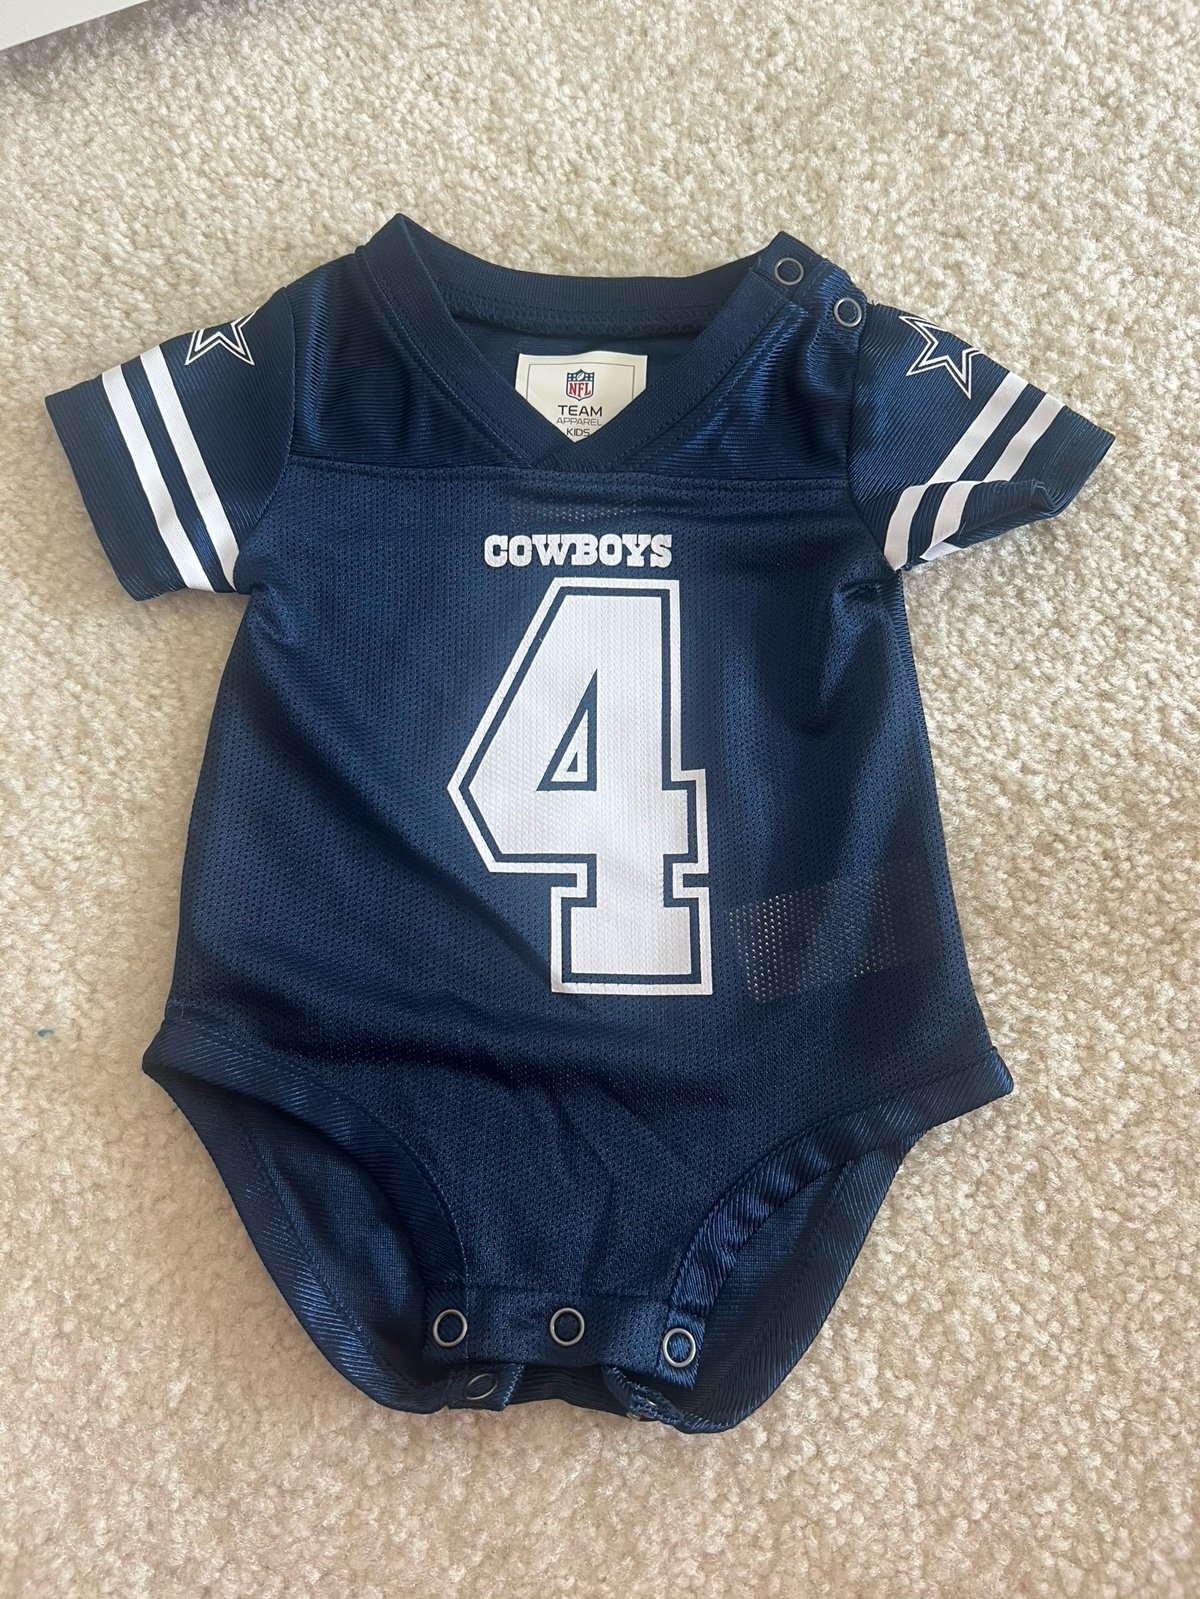 Baby Cowboys Jersey - 3 Months a18i7W74H